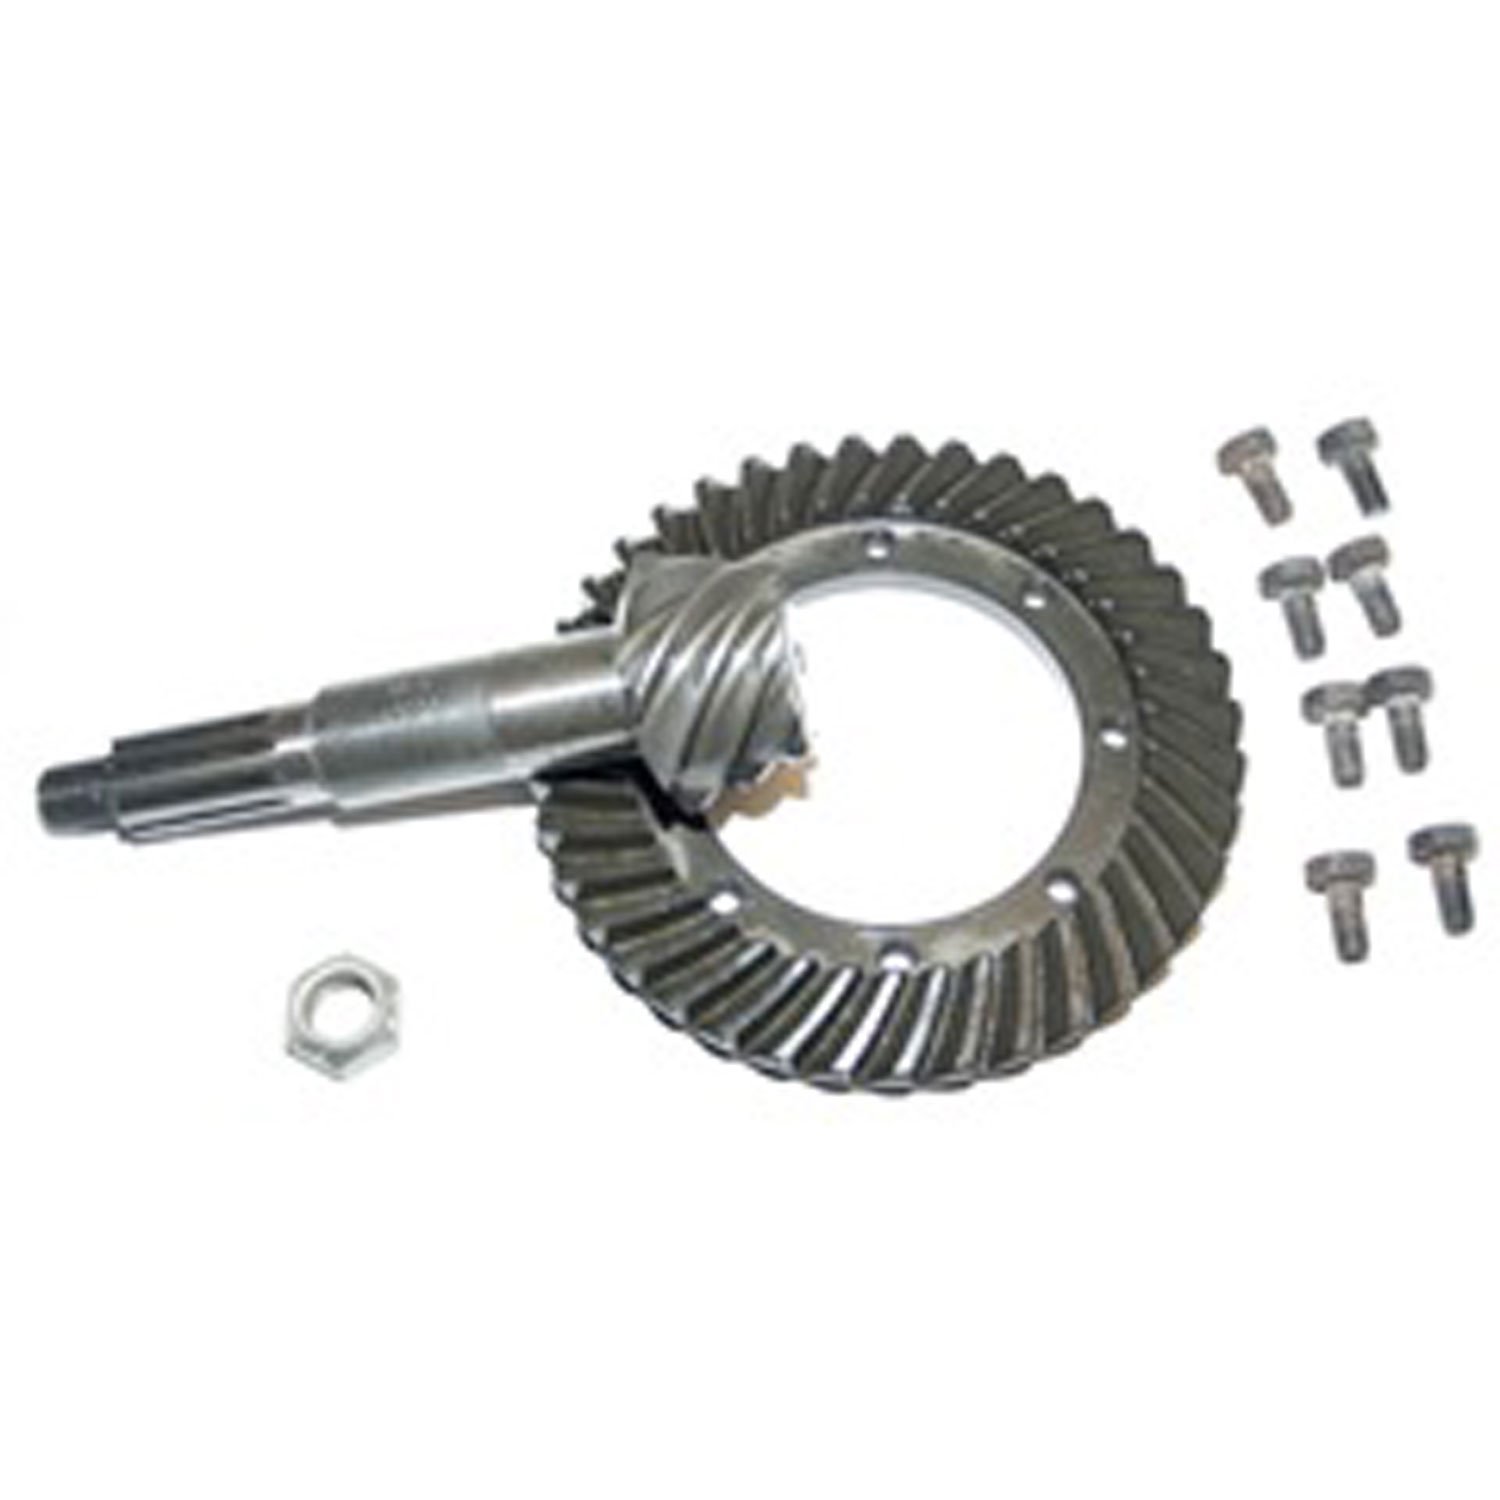 This 4.88 ratio ring and pinion set from